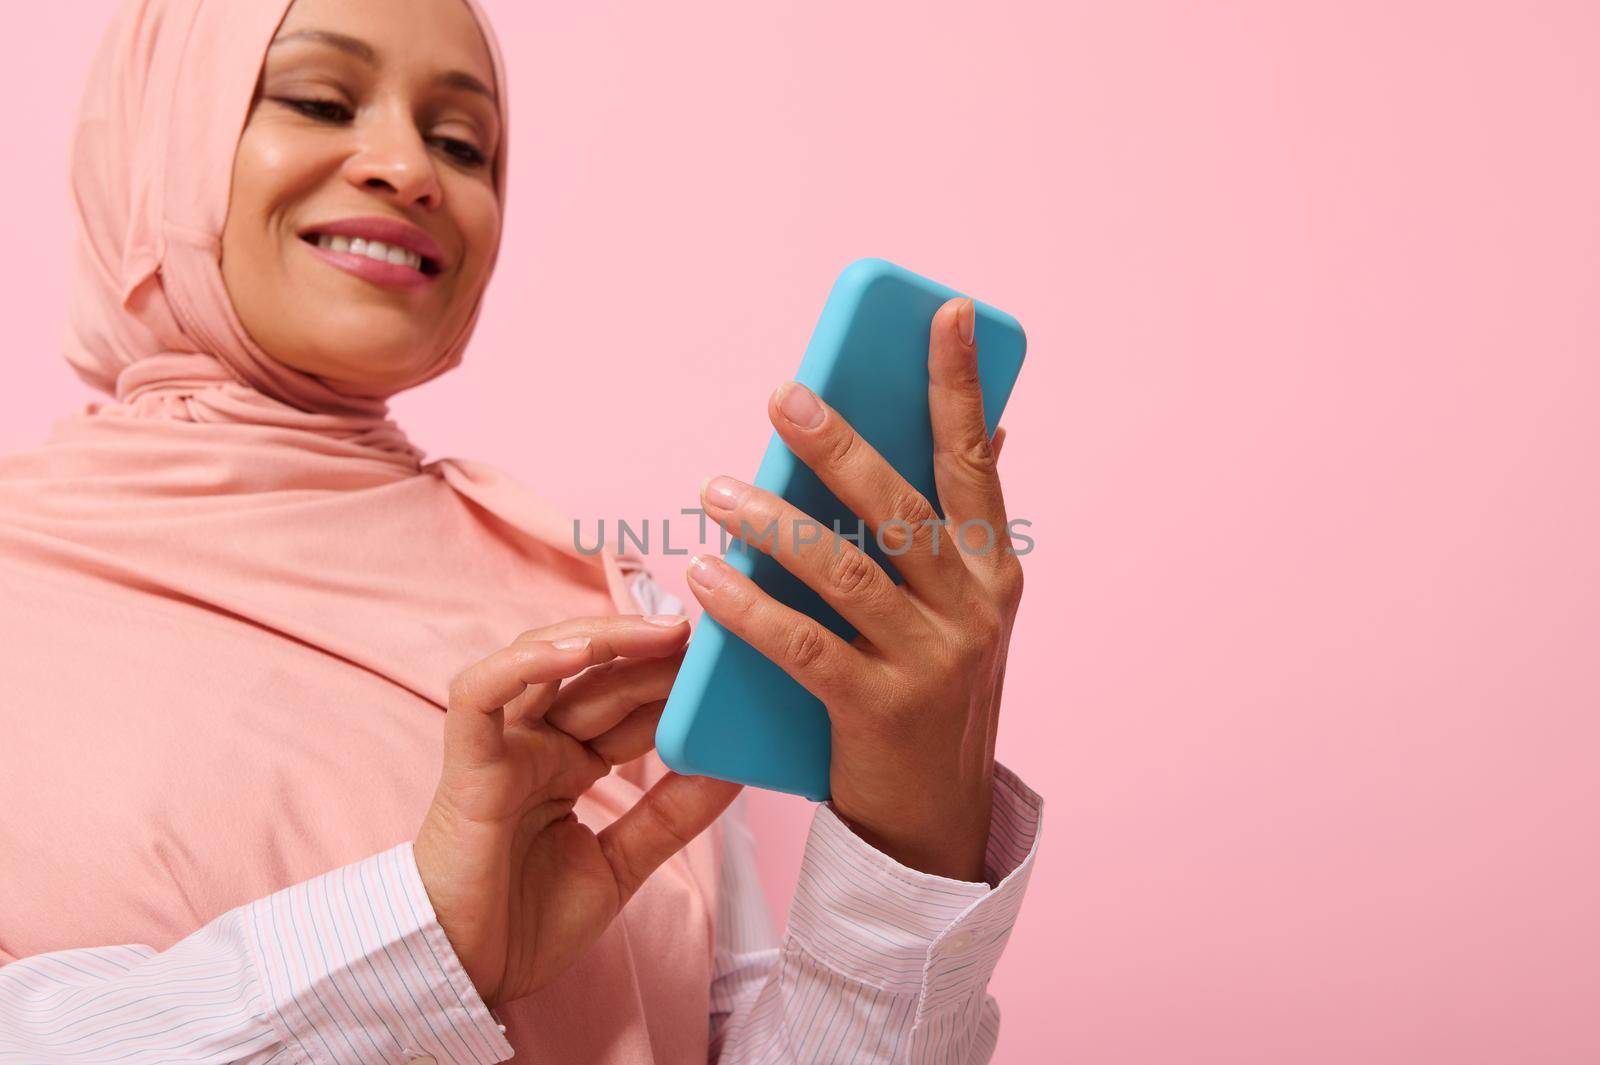 Smiling with toothy smile mature Muslim woman of Middle Eastern ethnicity in pink hijab with smartphone in blue cover on her hands, isolated on pink pastel background with copy space by artgf